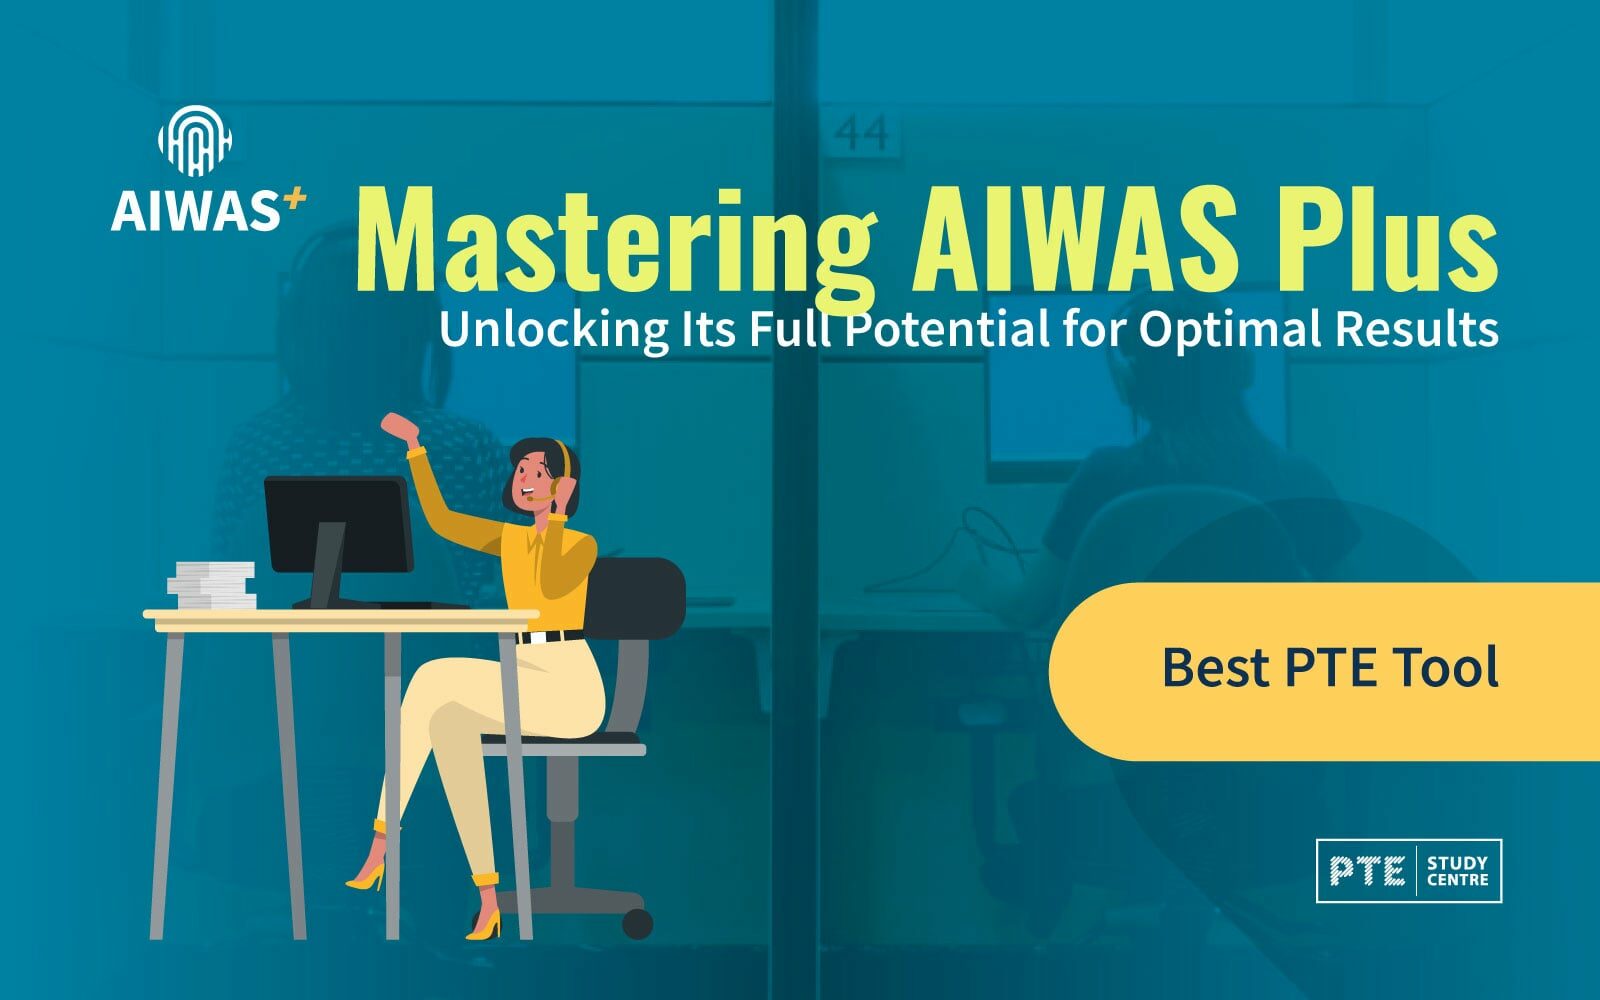 Mastering AIWAS Plus: Unlocking Its Full Potential for Optimal Results